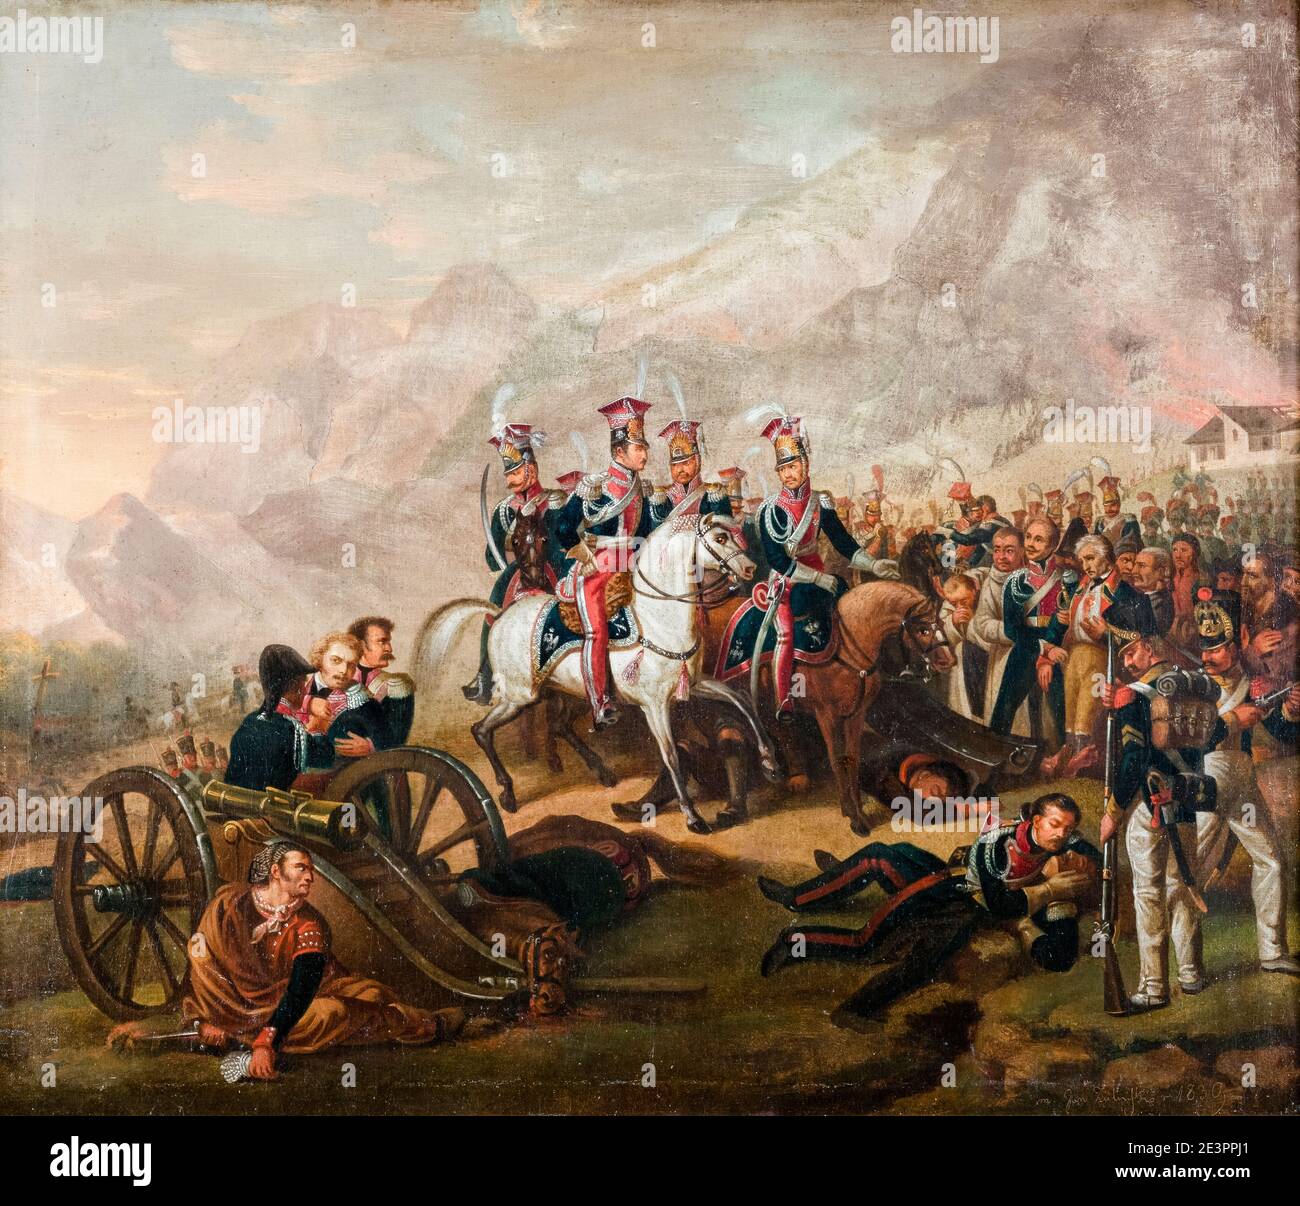 Horace Vernet, The Battle of Somosierra (30th November 1808), painting, 1839 Stock Photo